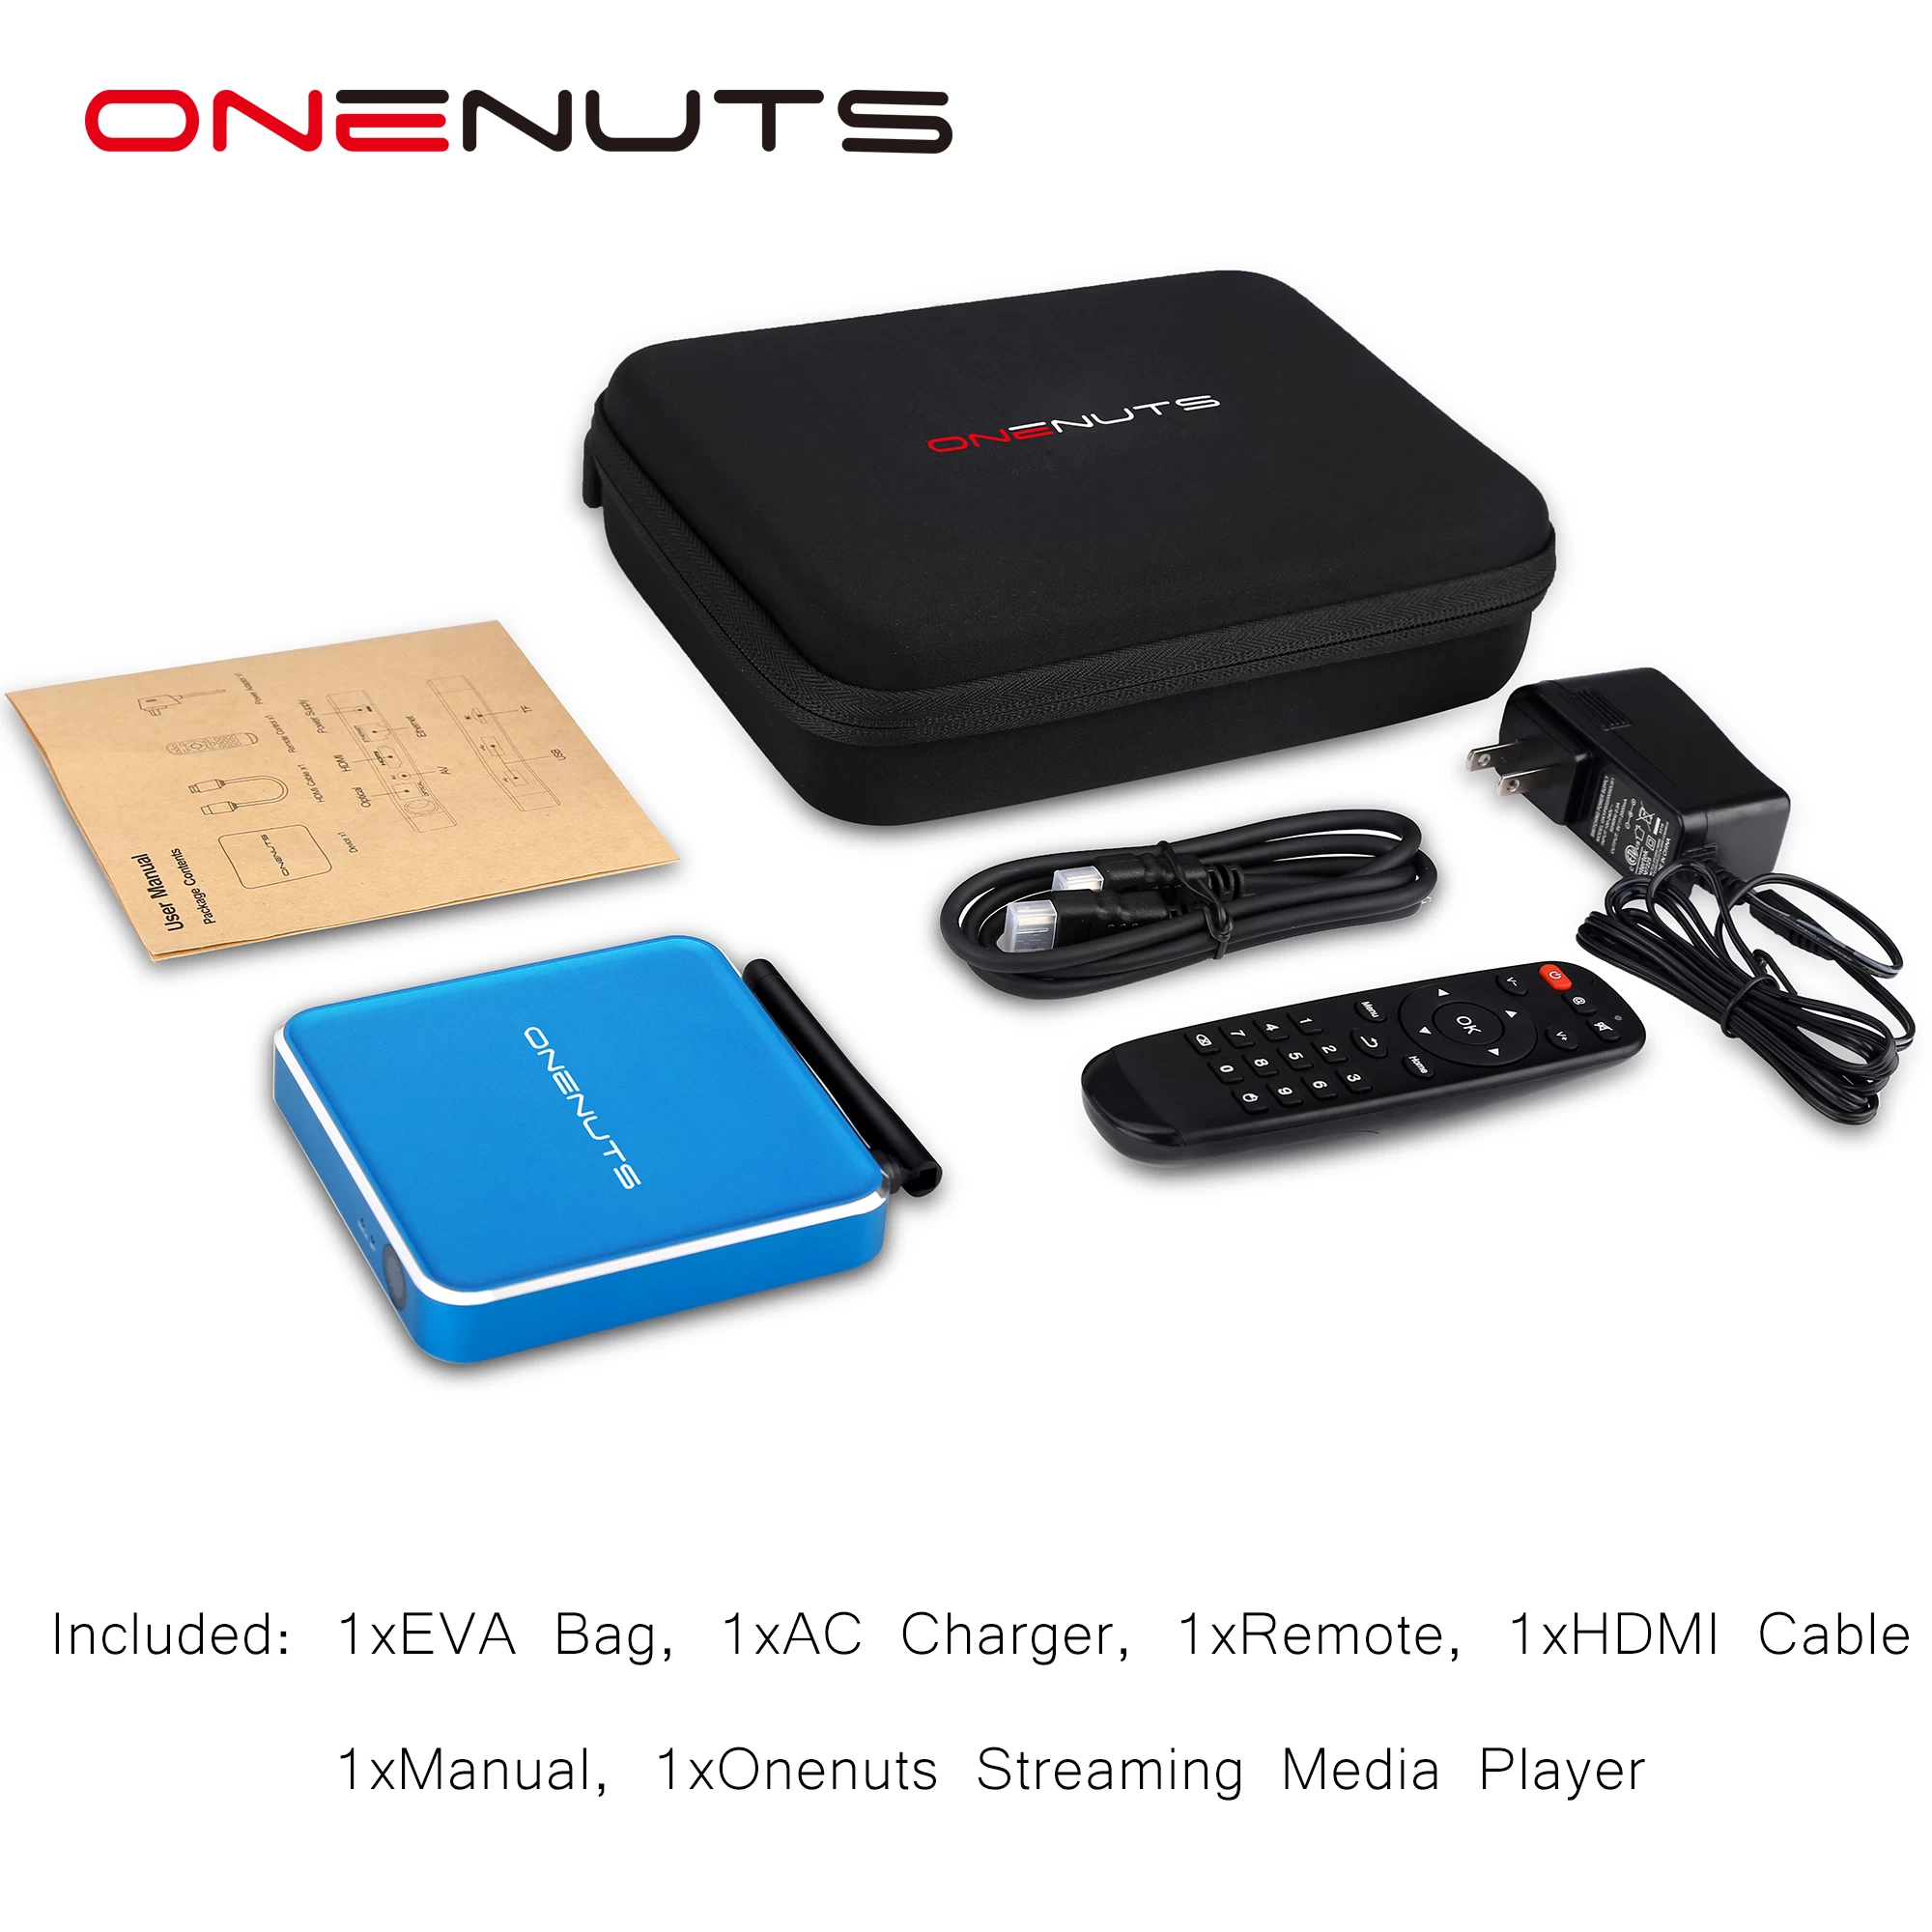 Android TV Box Octa Core 5G TV Boxes Support 5G WiFi with Dual WiFi